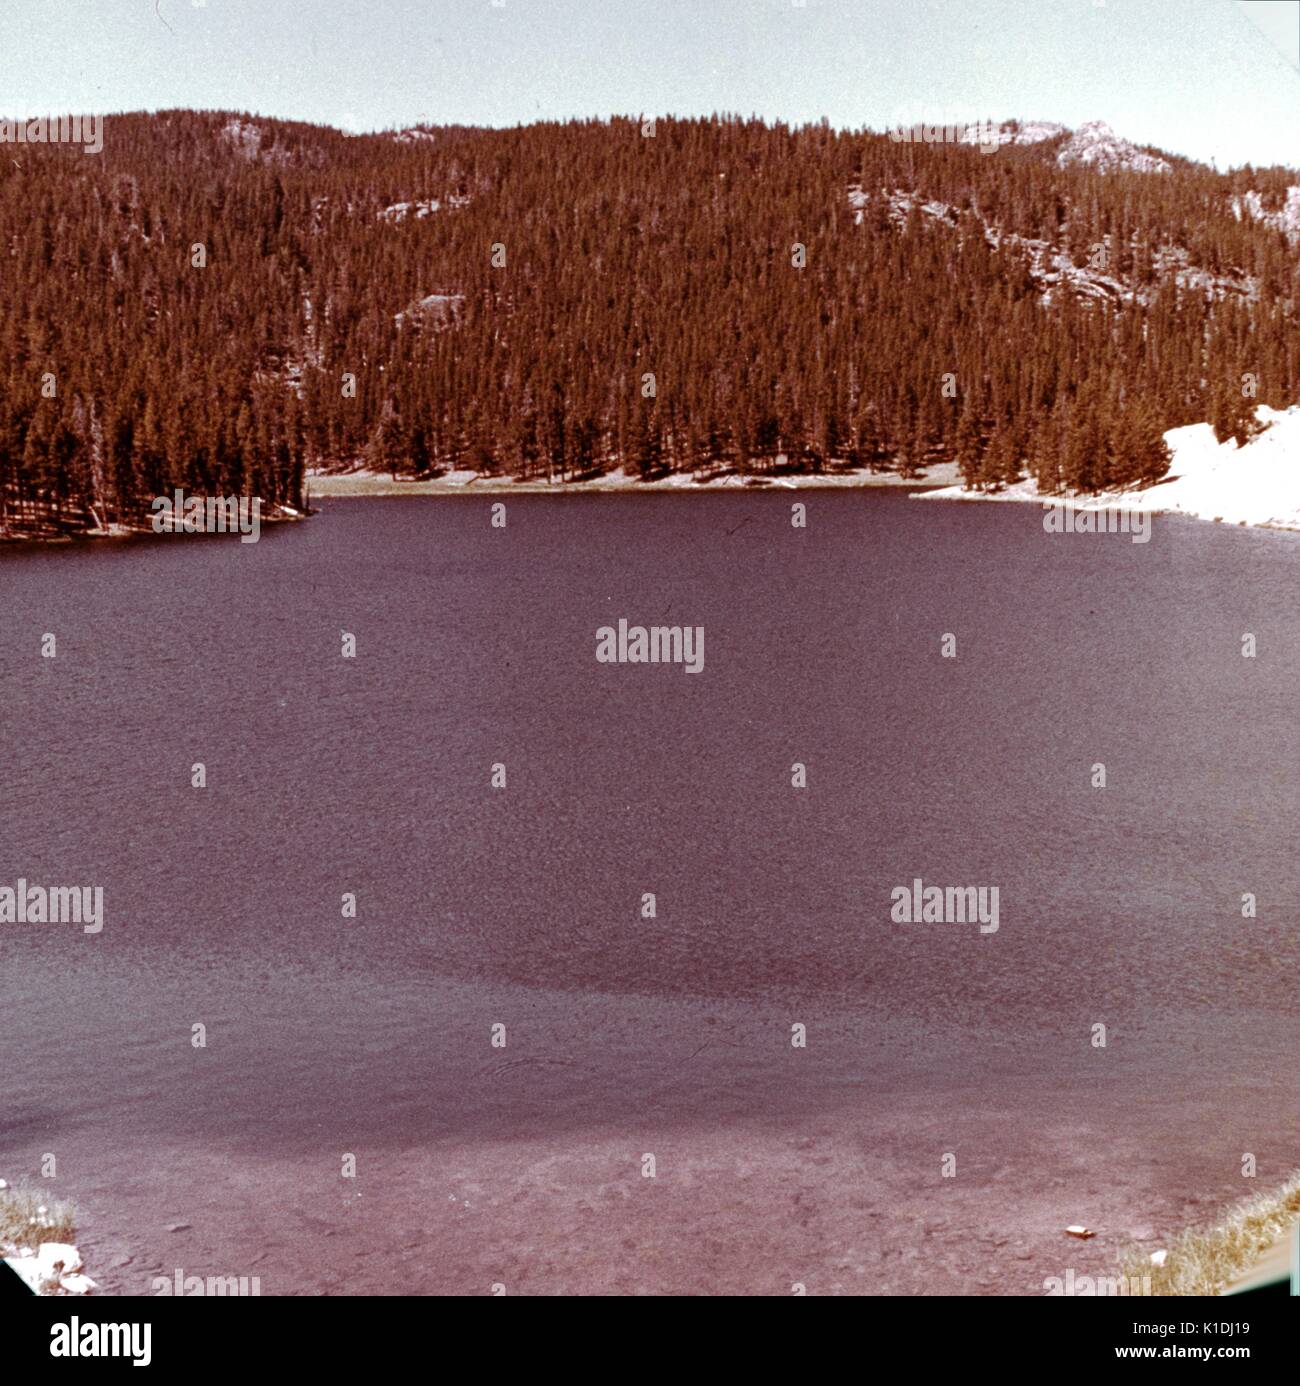 A photograph of Sibley Lake, taken from above on a hillside vantage point, snow can be seen covering the ground, trees and hills make up the background, Bighorn National Forest, Wyoming, 1975. Stock Photo